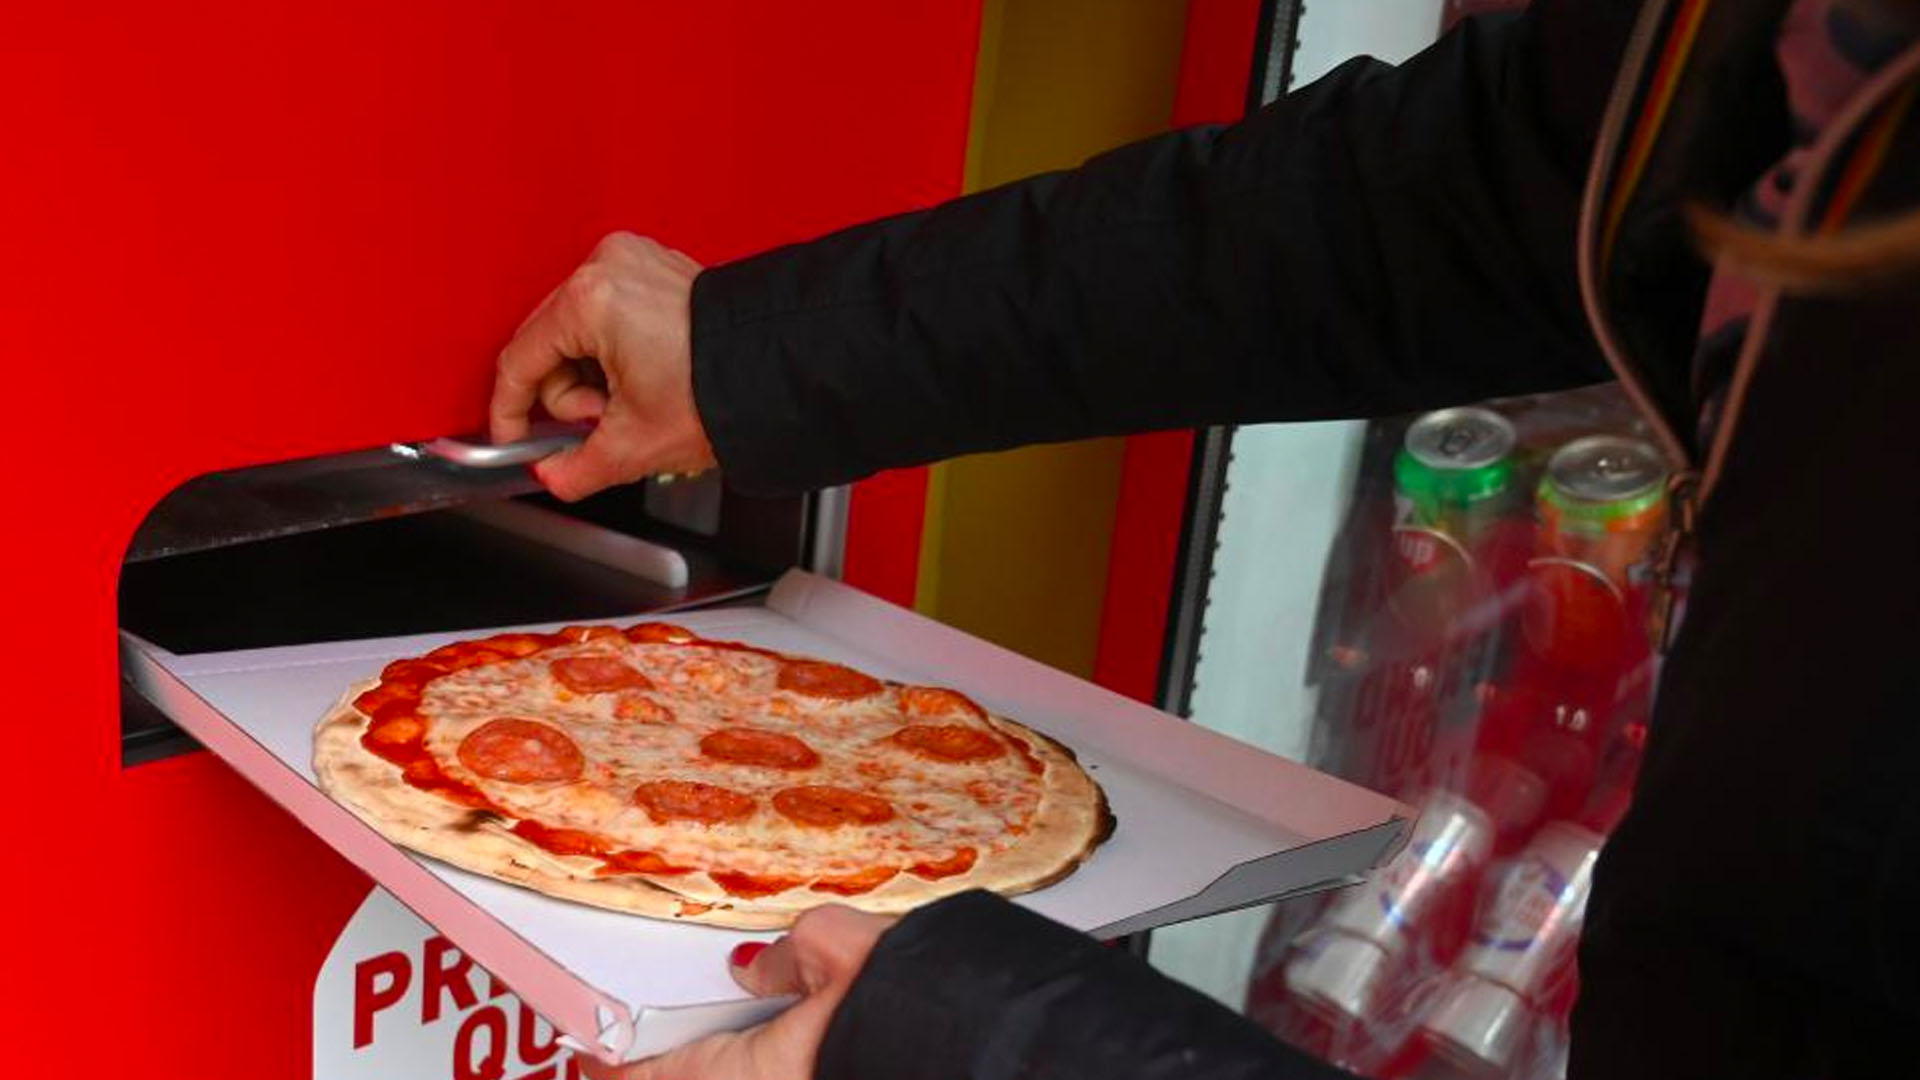 Pizza vending machines in Rome did not work well with the public